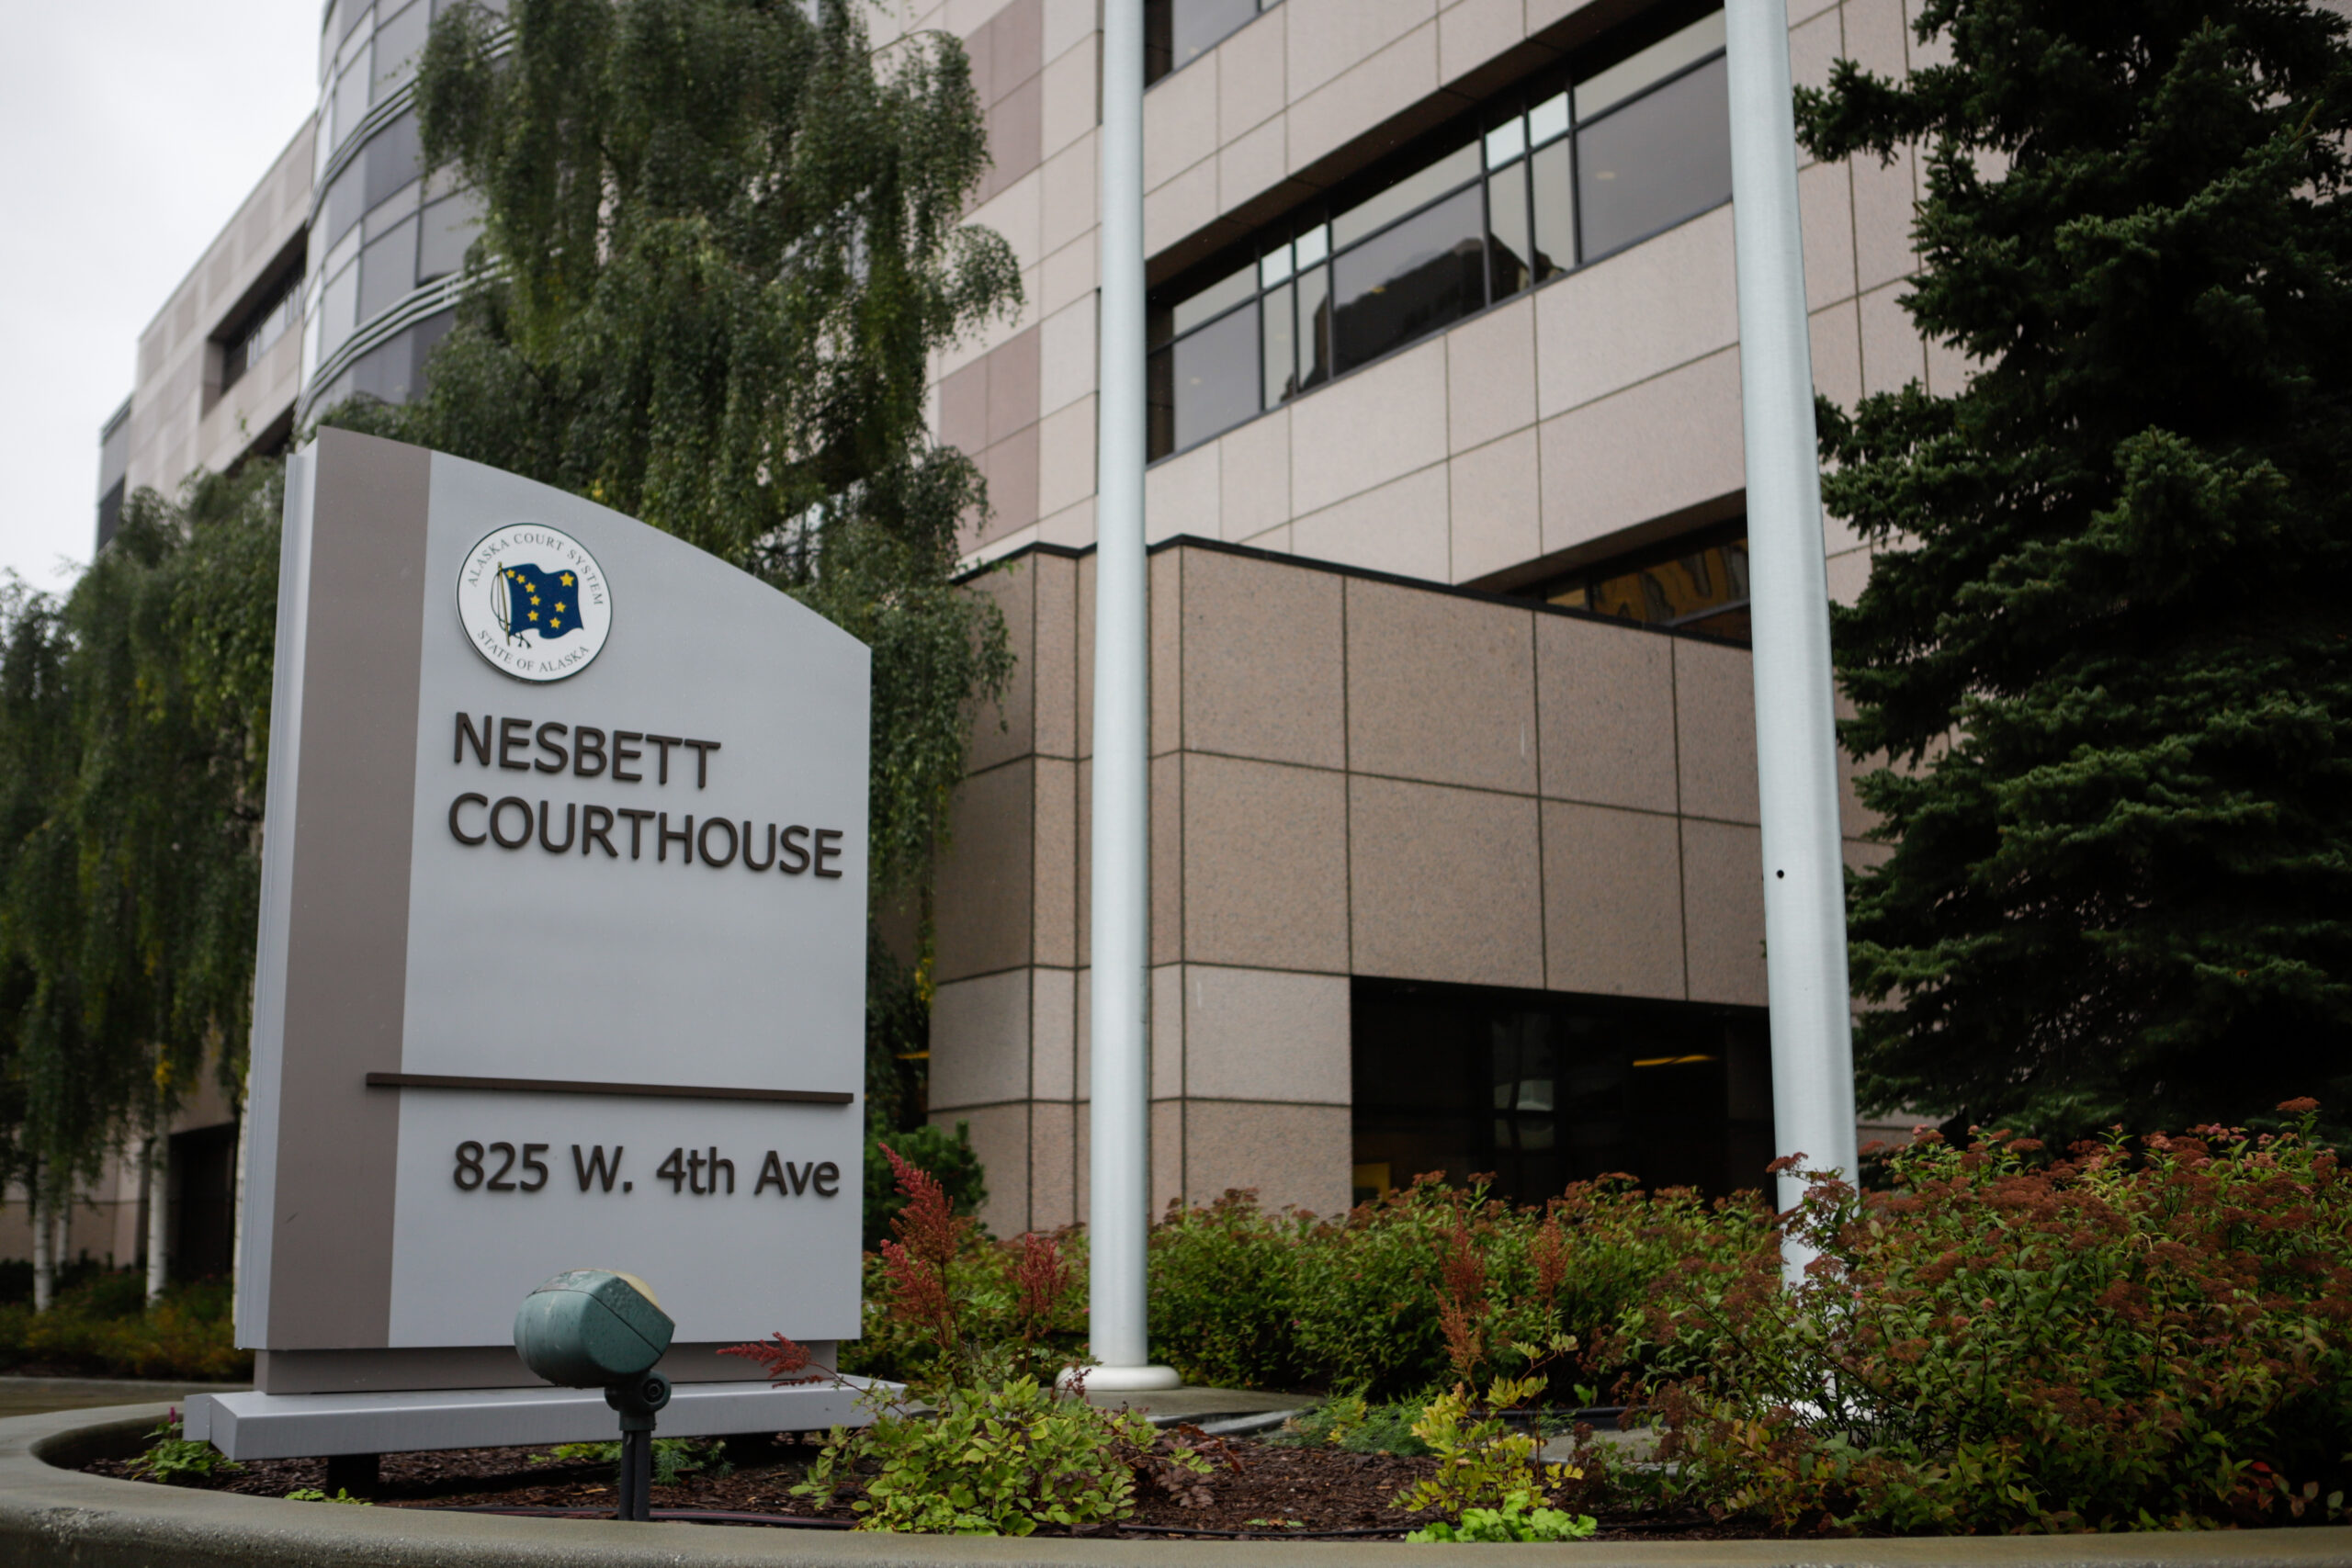 A sign, in a small garden with shrubs, reads "Nesbett Courthouse."